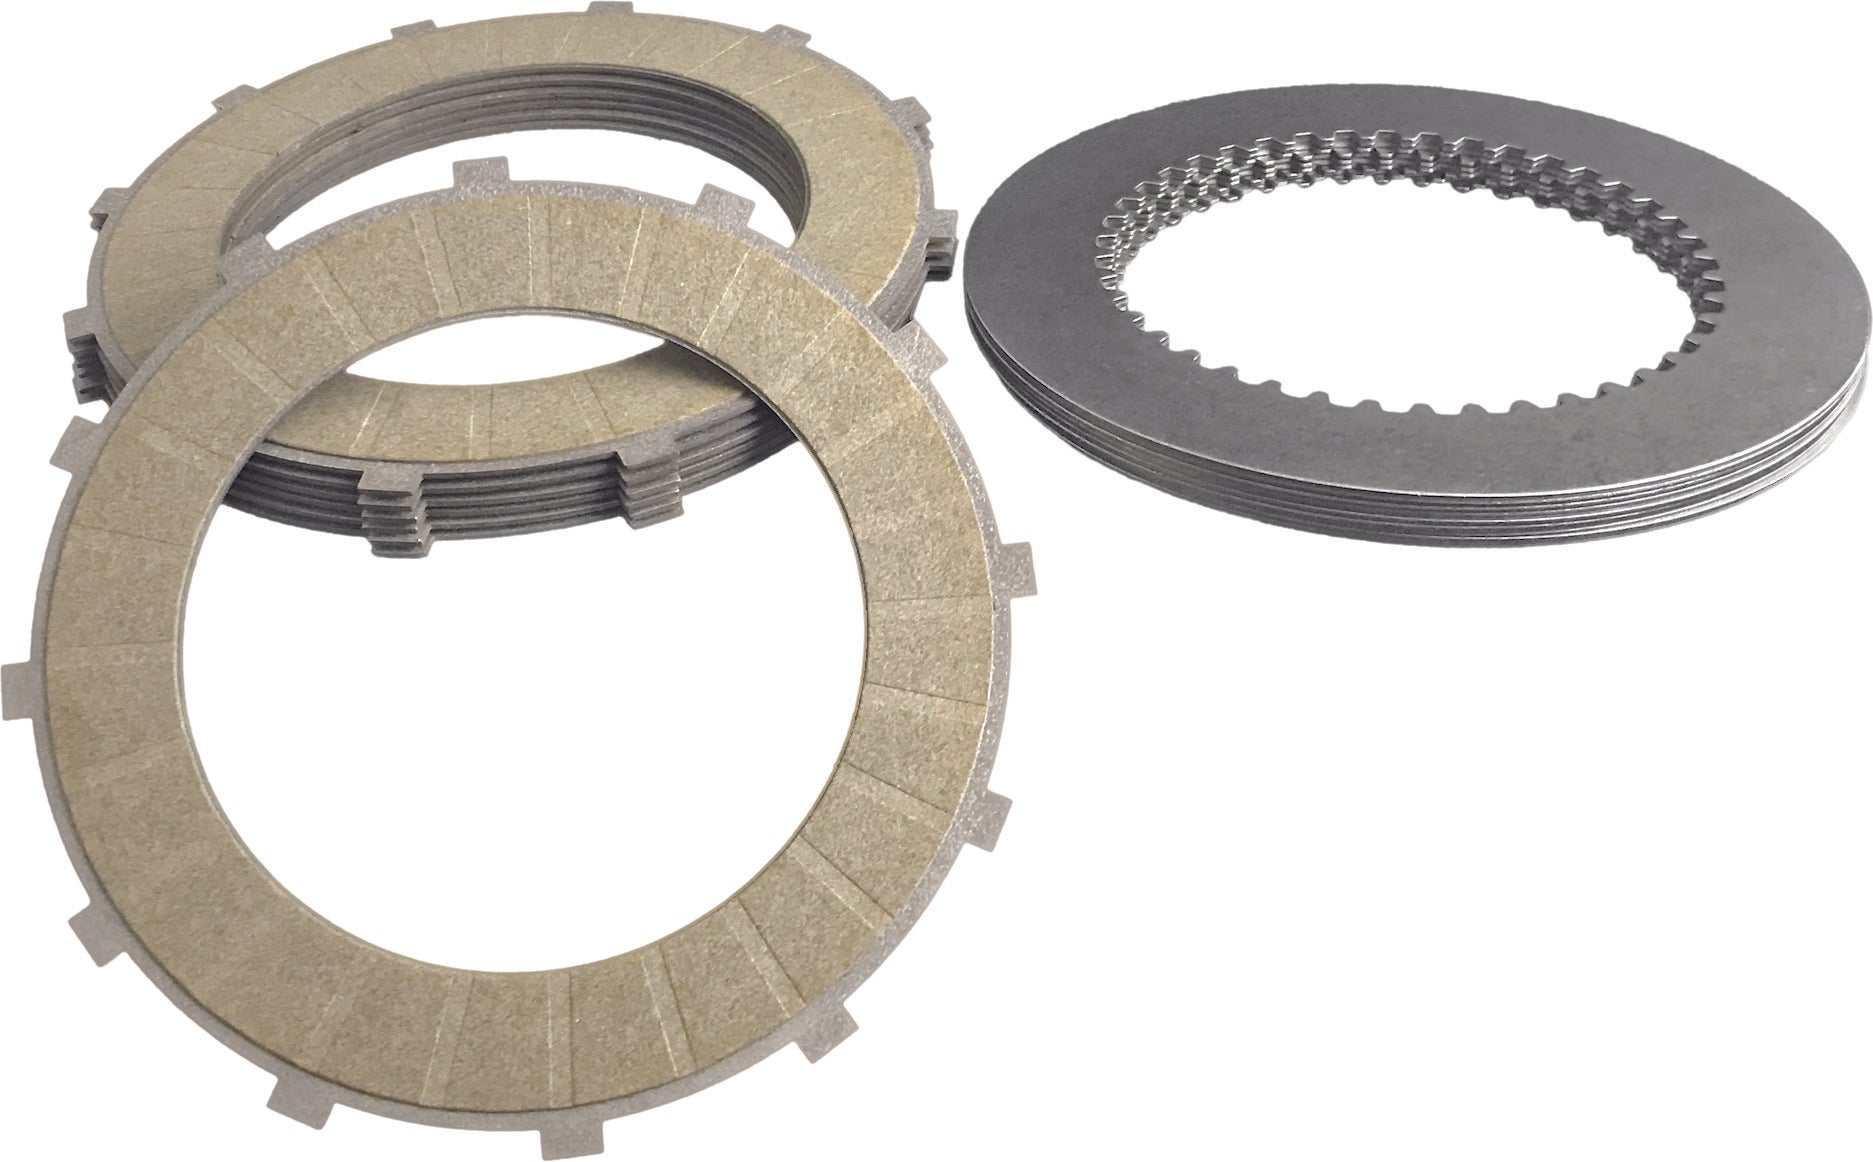 ENERGY ONE, ENERGY ONE E1 CLUTCH KIT FOR RIVERA PRO 86-89 RP-0005